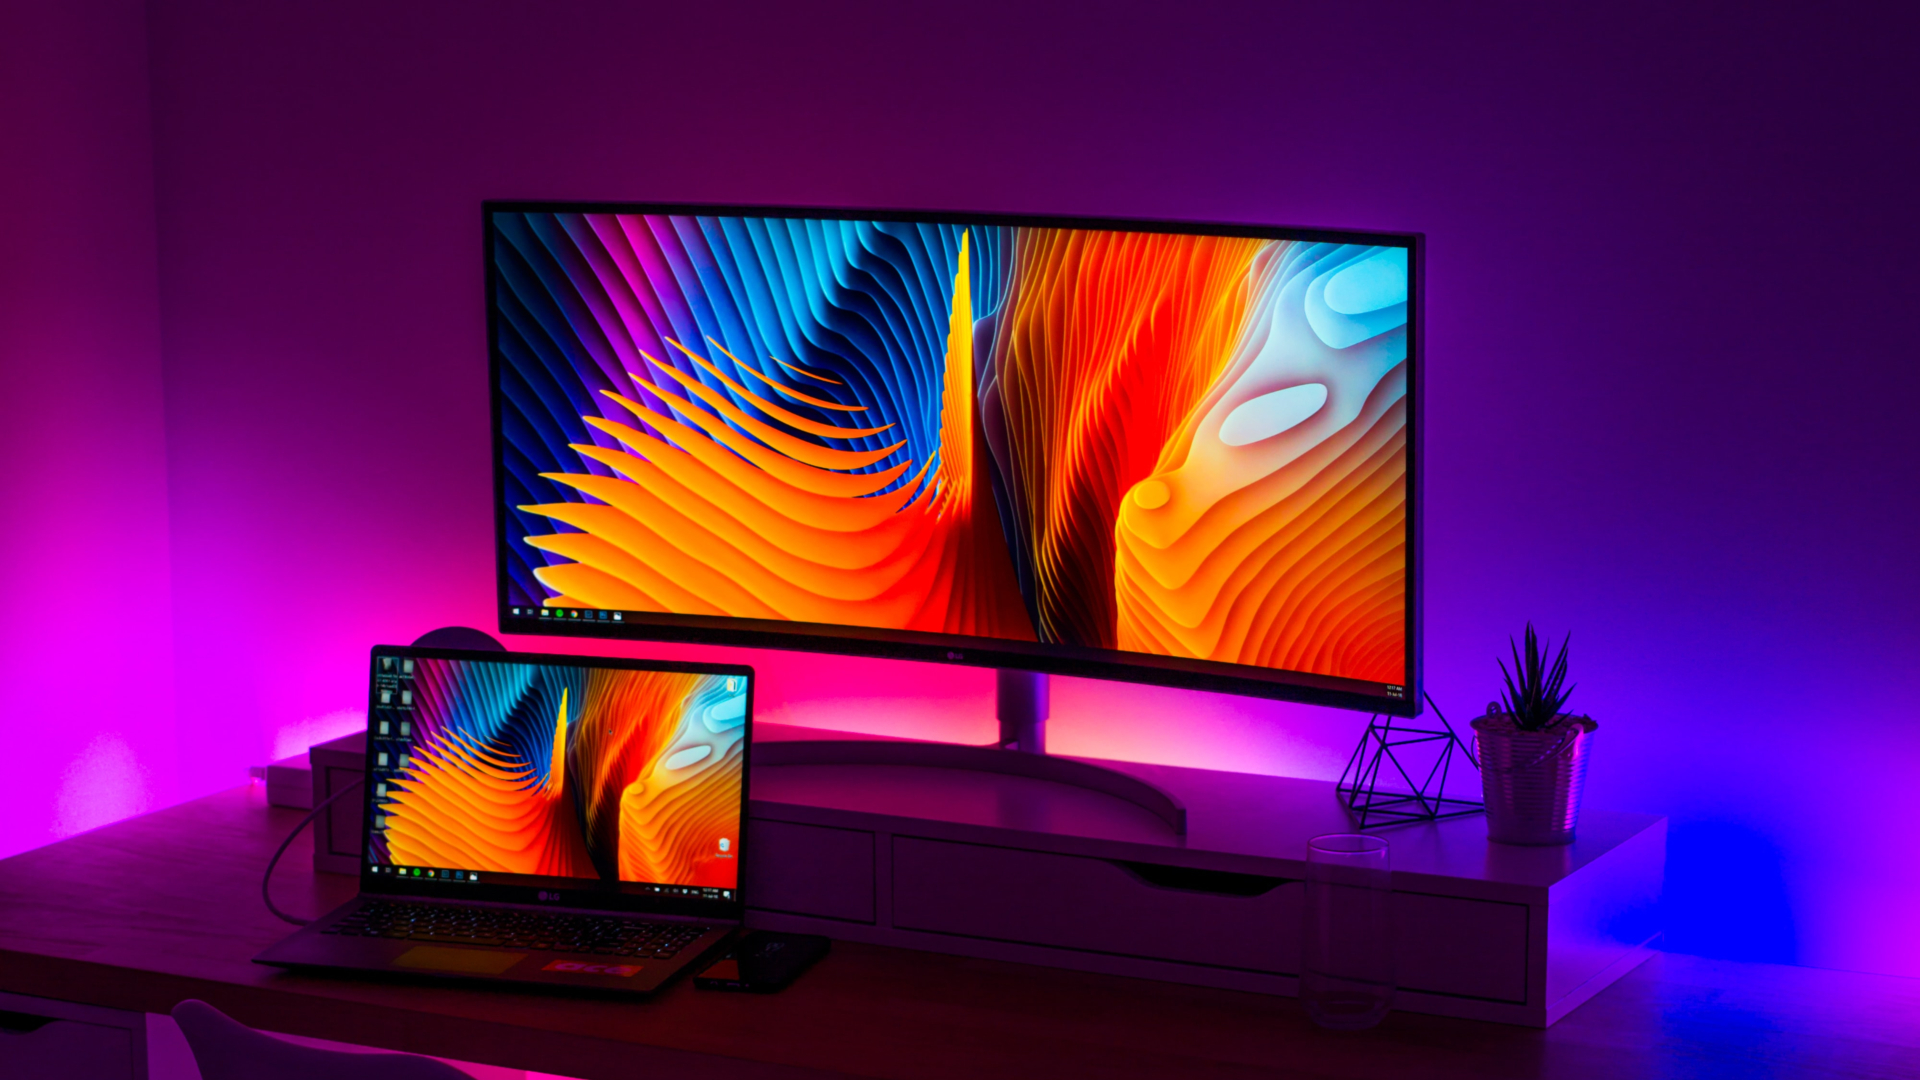 Considering Ultrawide and Curved Monitors